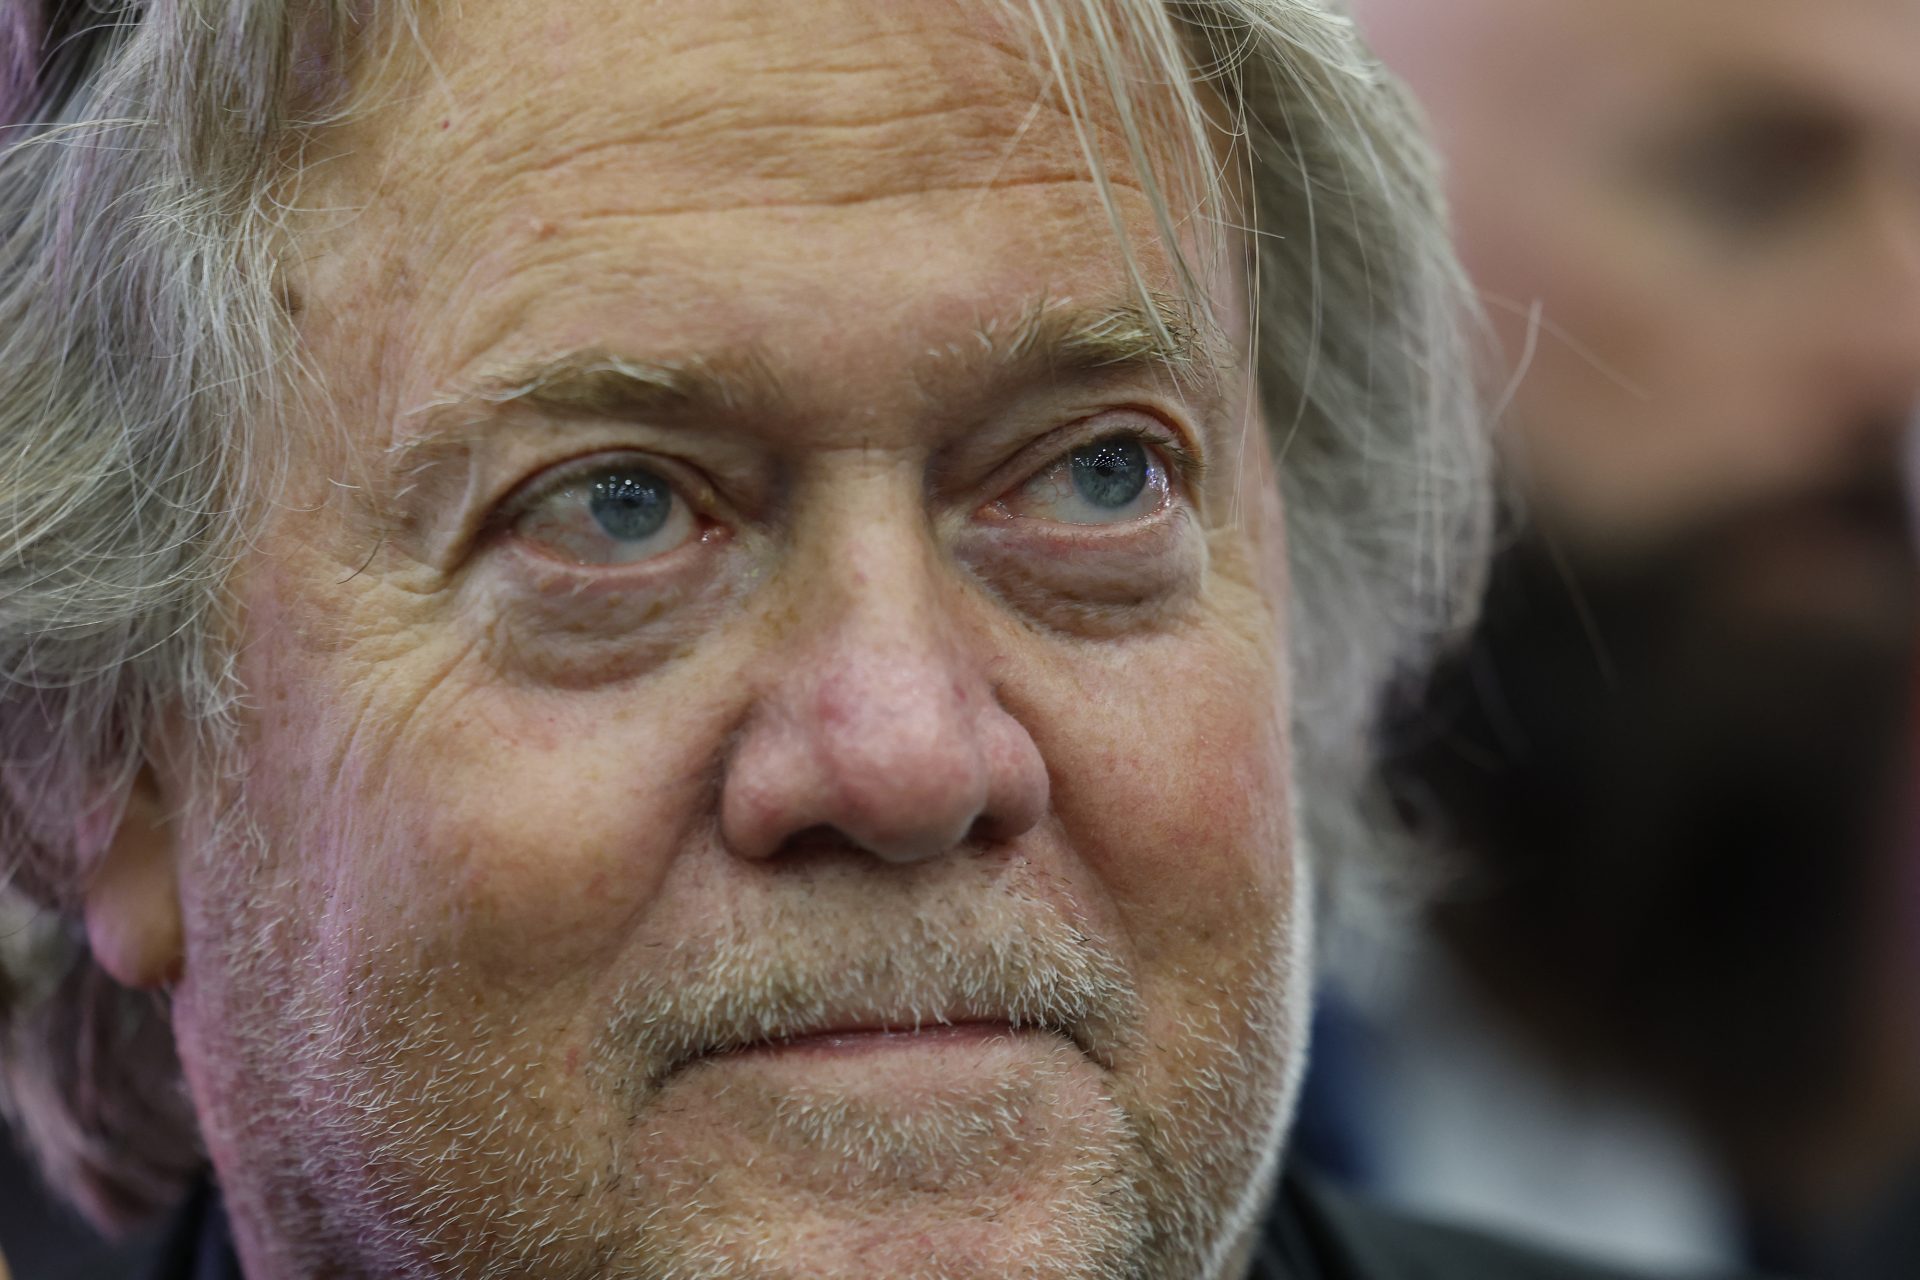 Trump ally Steve Bannon has until July 1 to surrender to prison